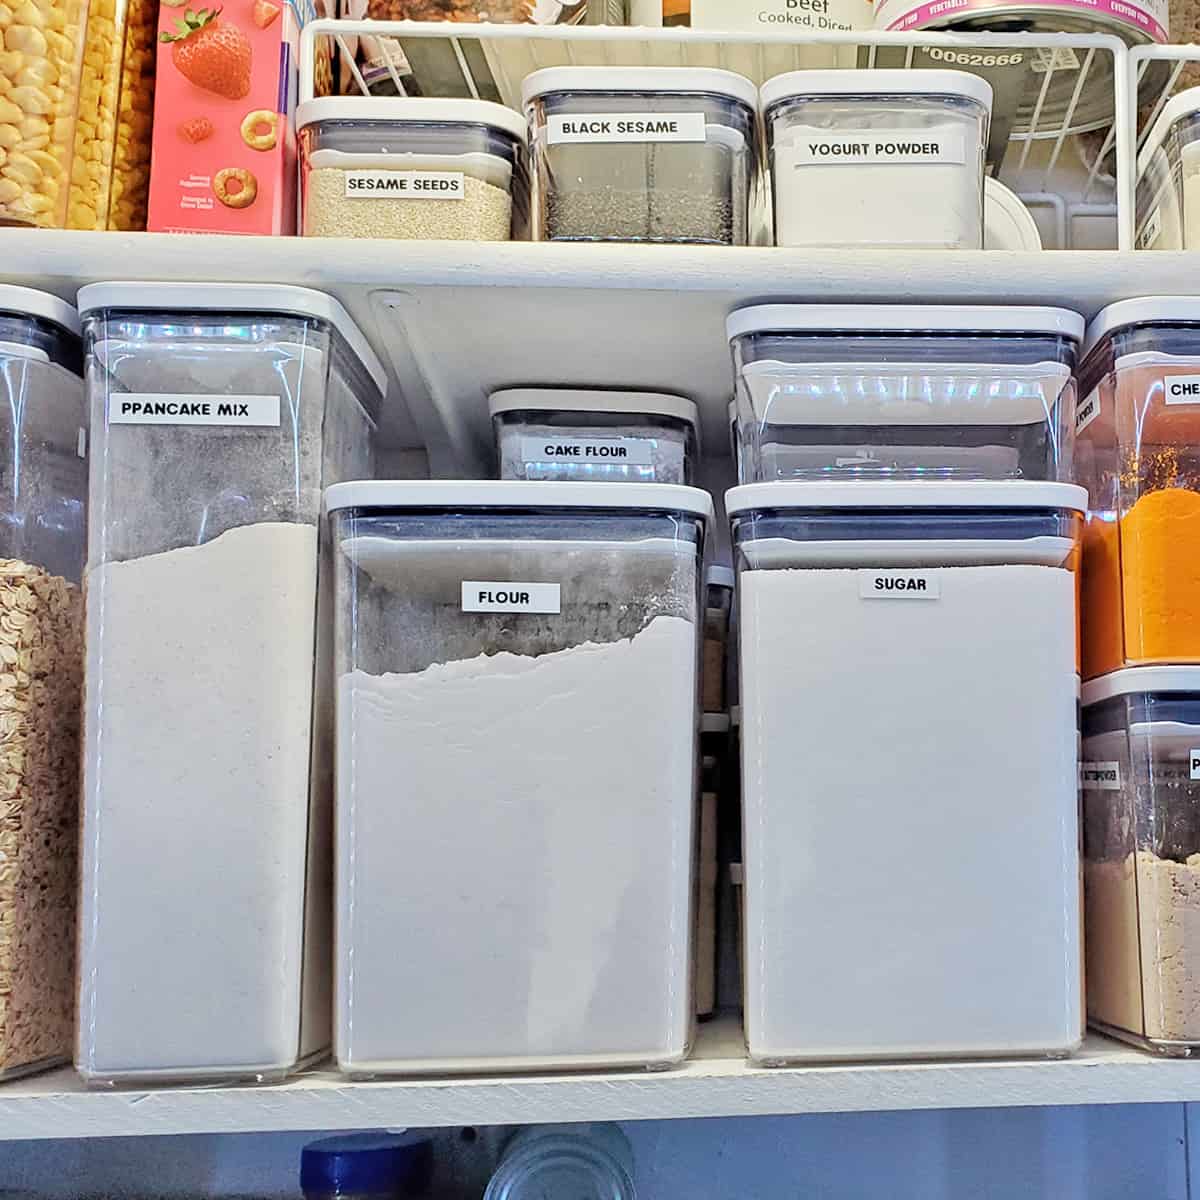 A must have for an organized pantry! These oxo pop container sets